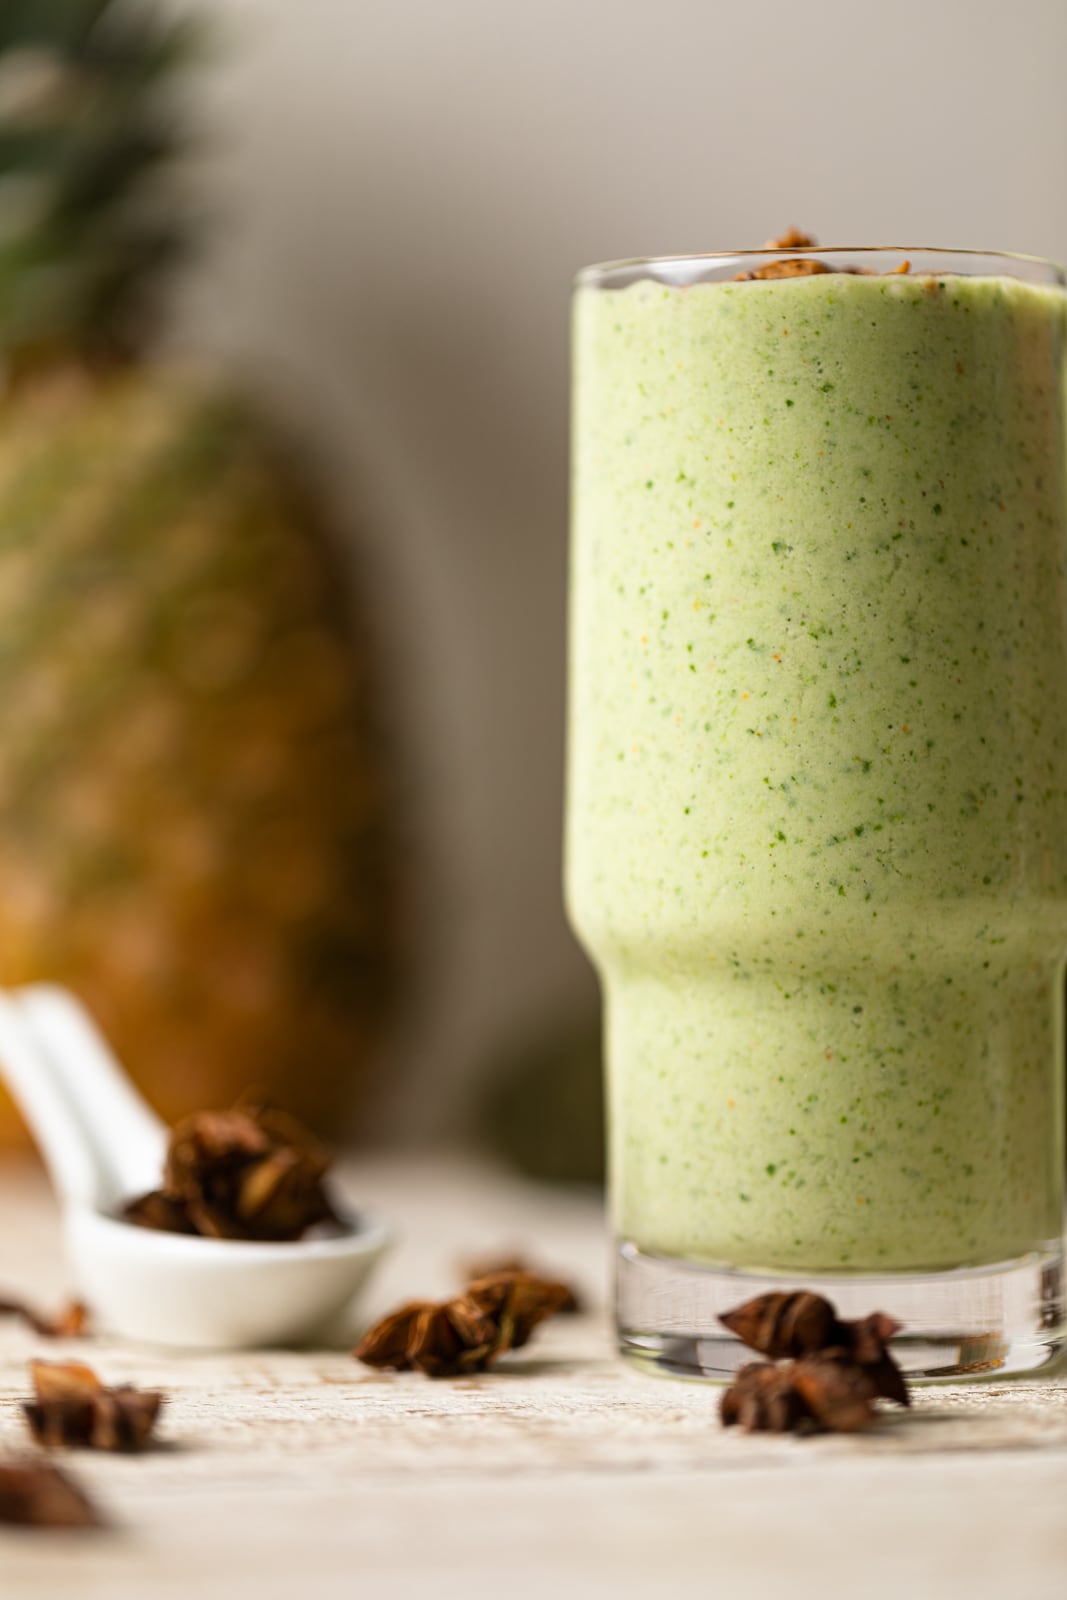 Smoothie in a glass with a pineapple on the side.